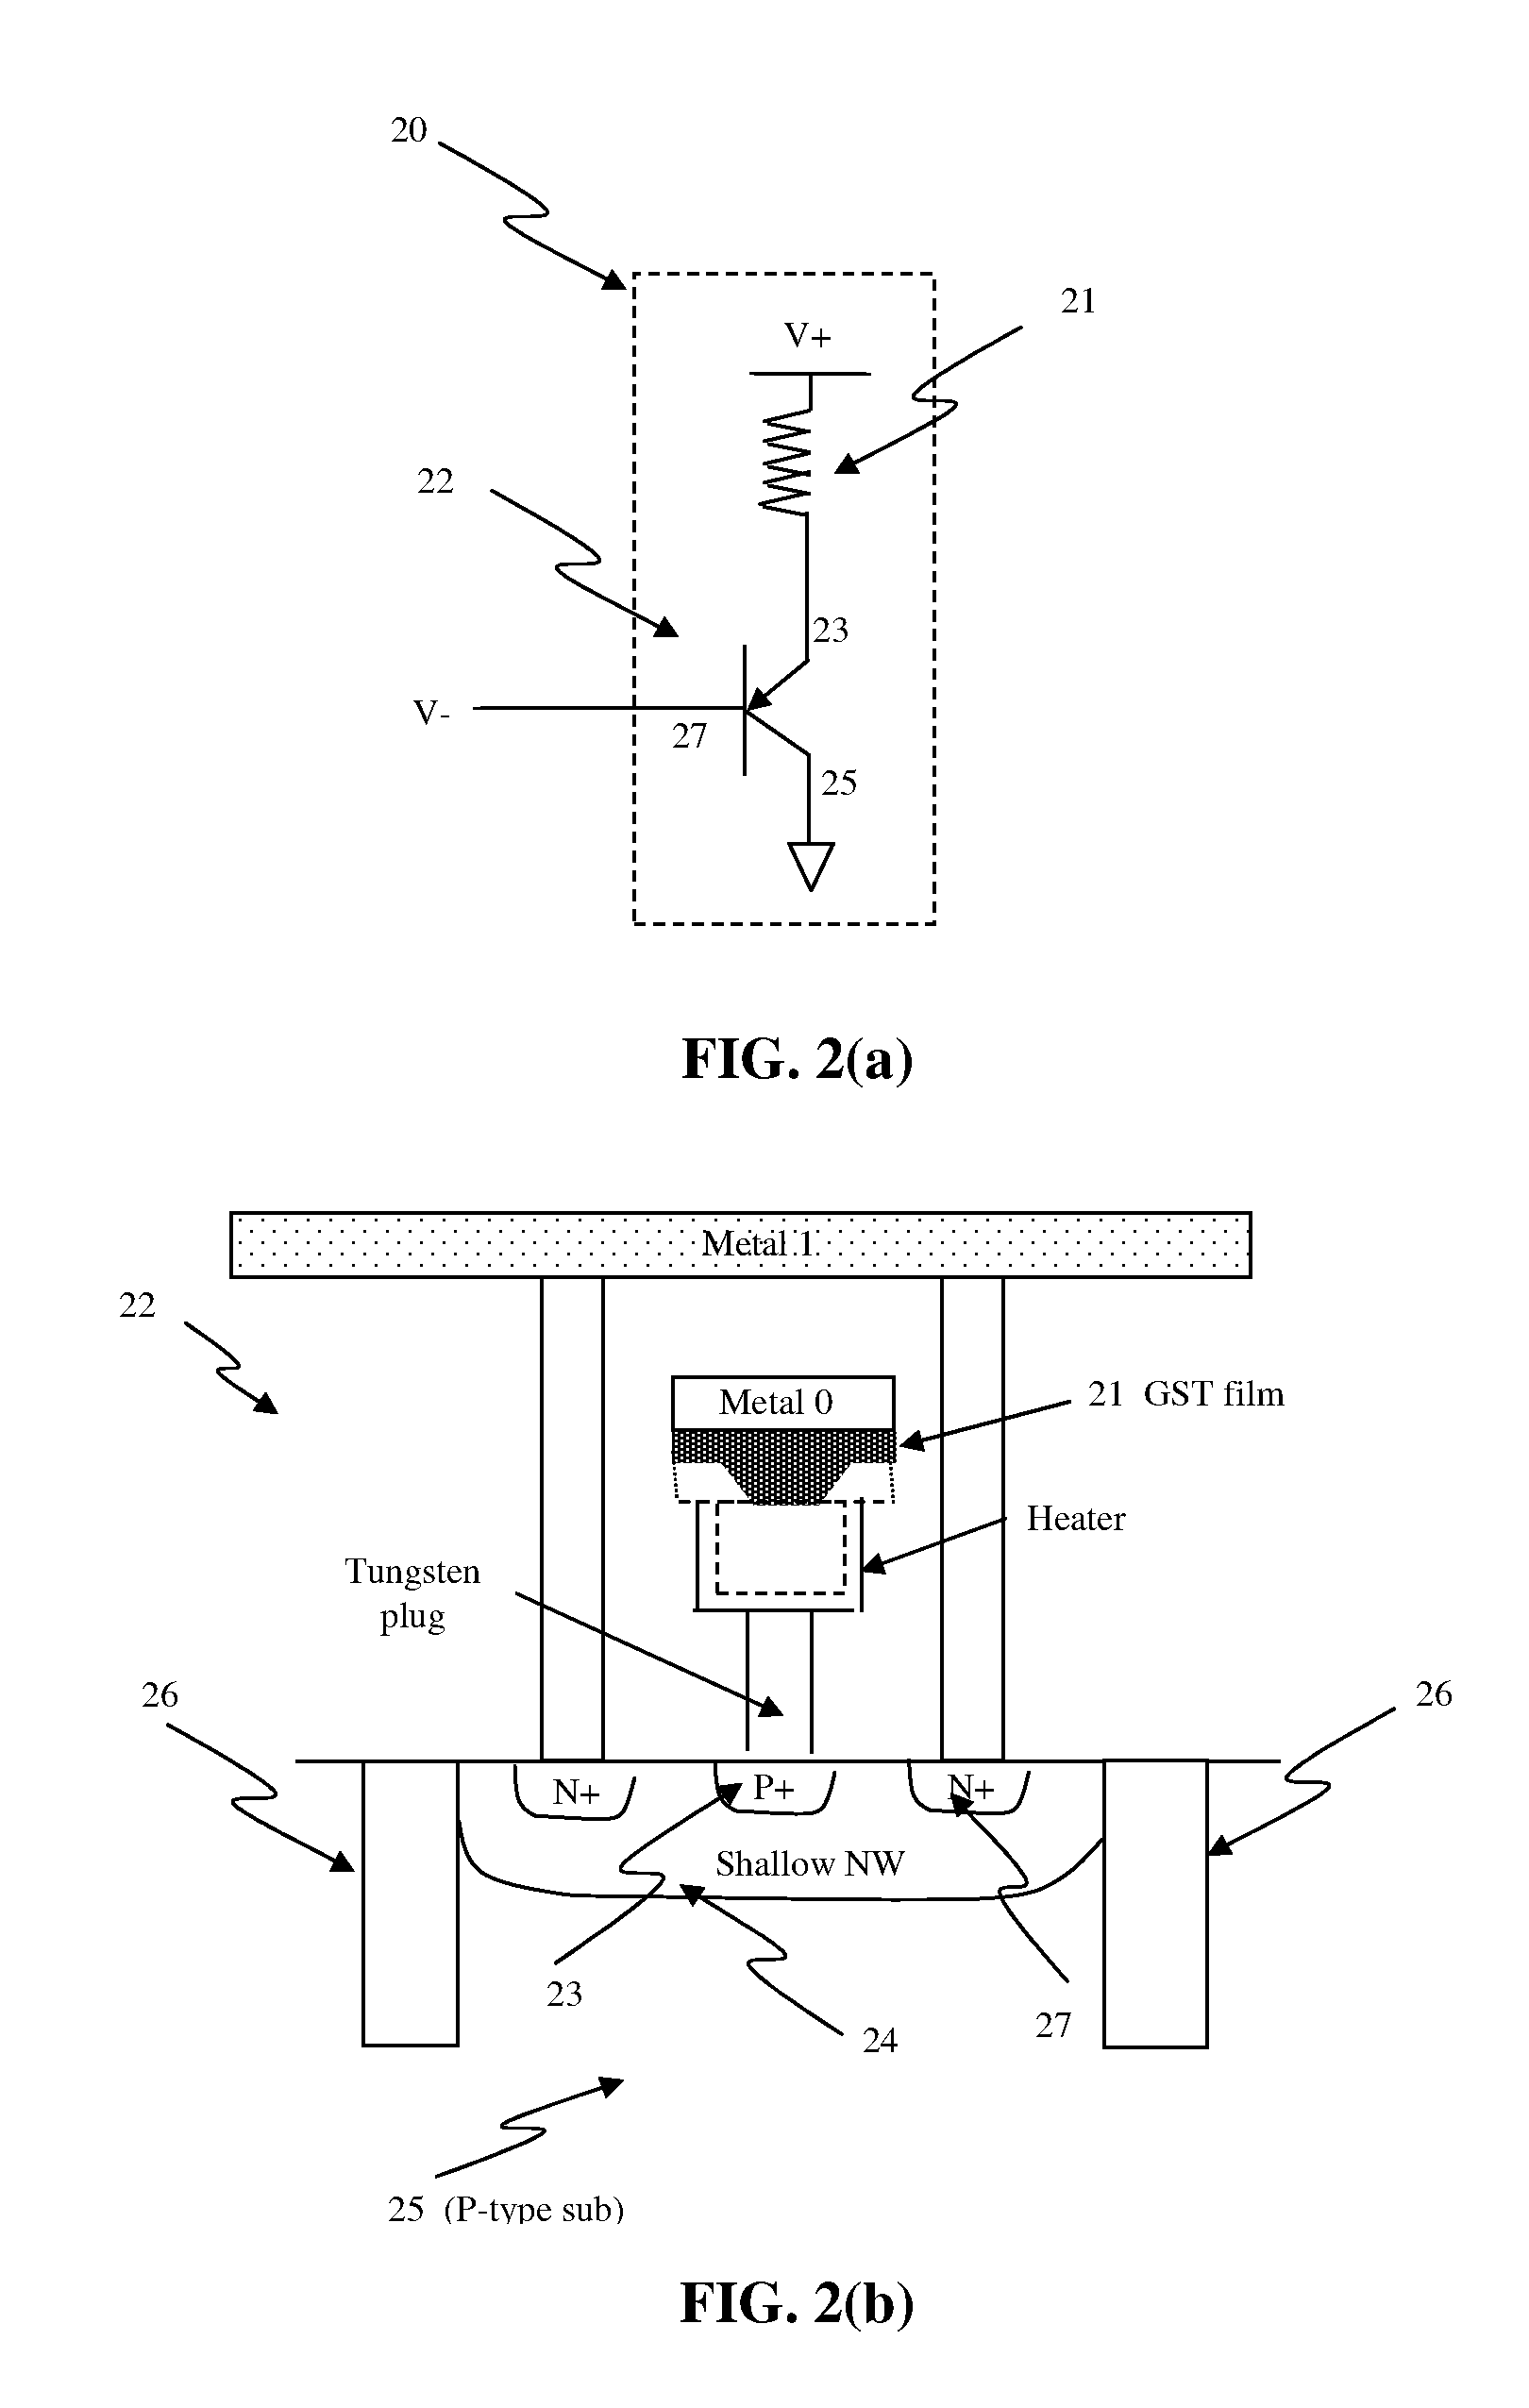 Circuit and system of using junction diode as program selector and mos as read selector for one-time programmable devices